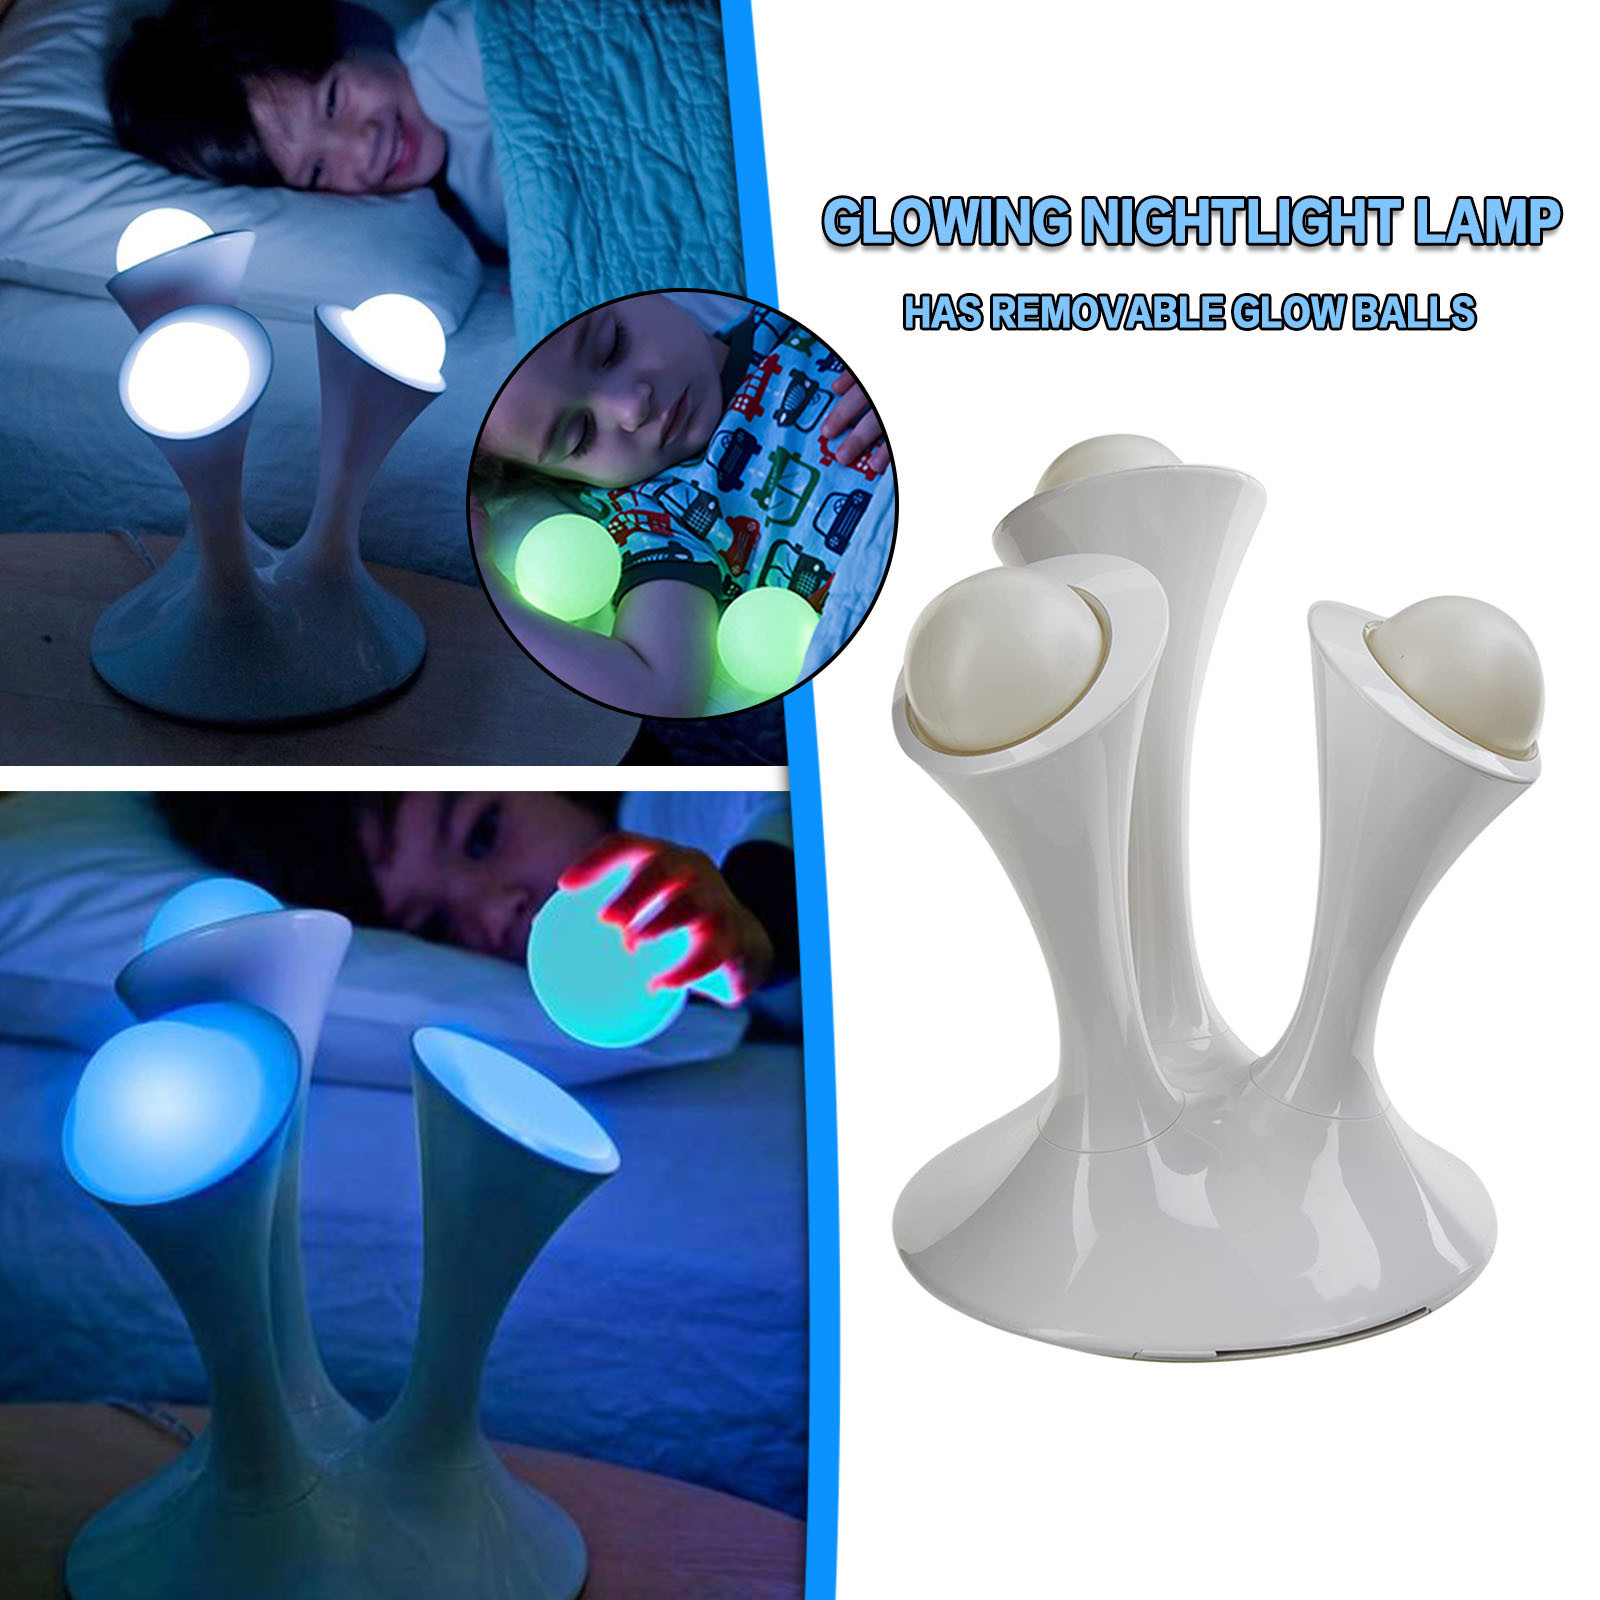 This Glowing Nightlight Lamp Has Removable Glow Balls For Trips To The Bathroom Beautiful Home Decorative Wall Nightlights#T2